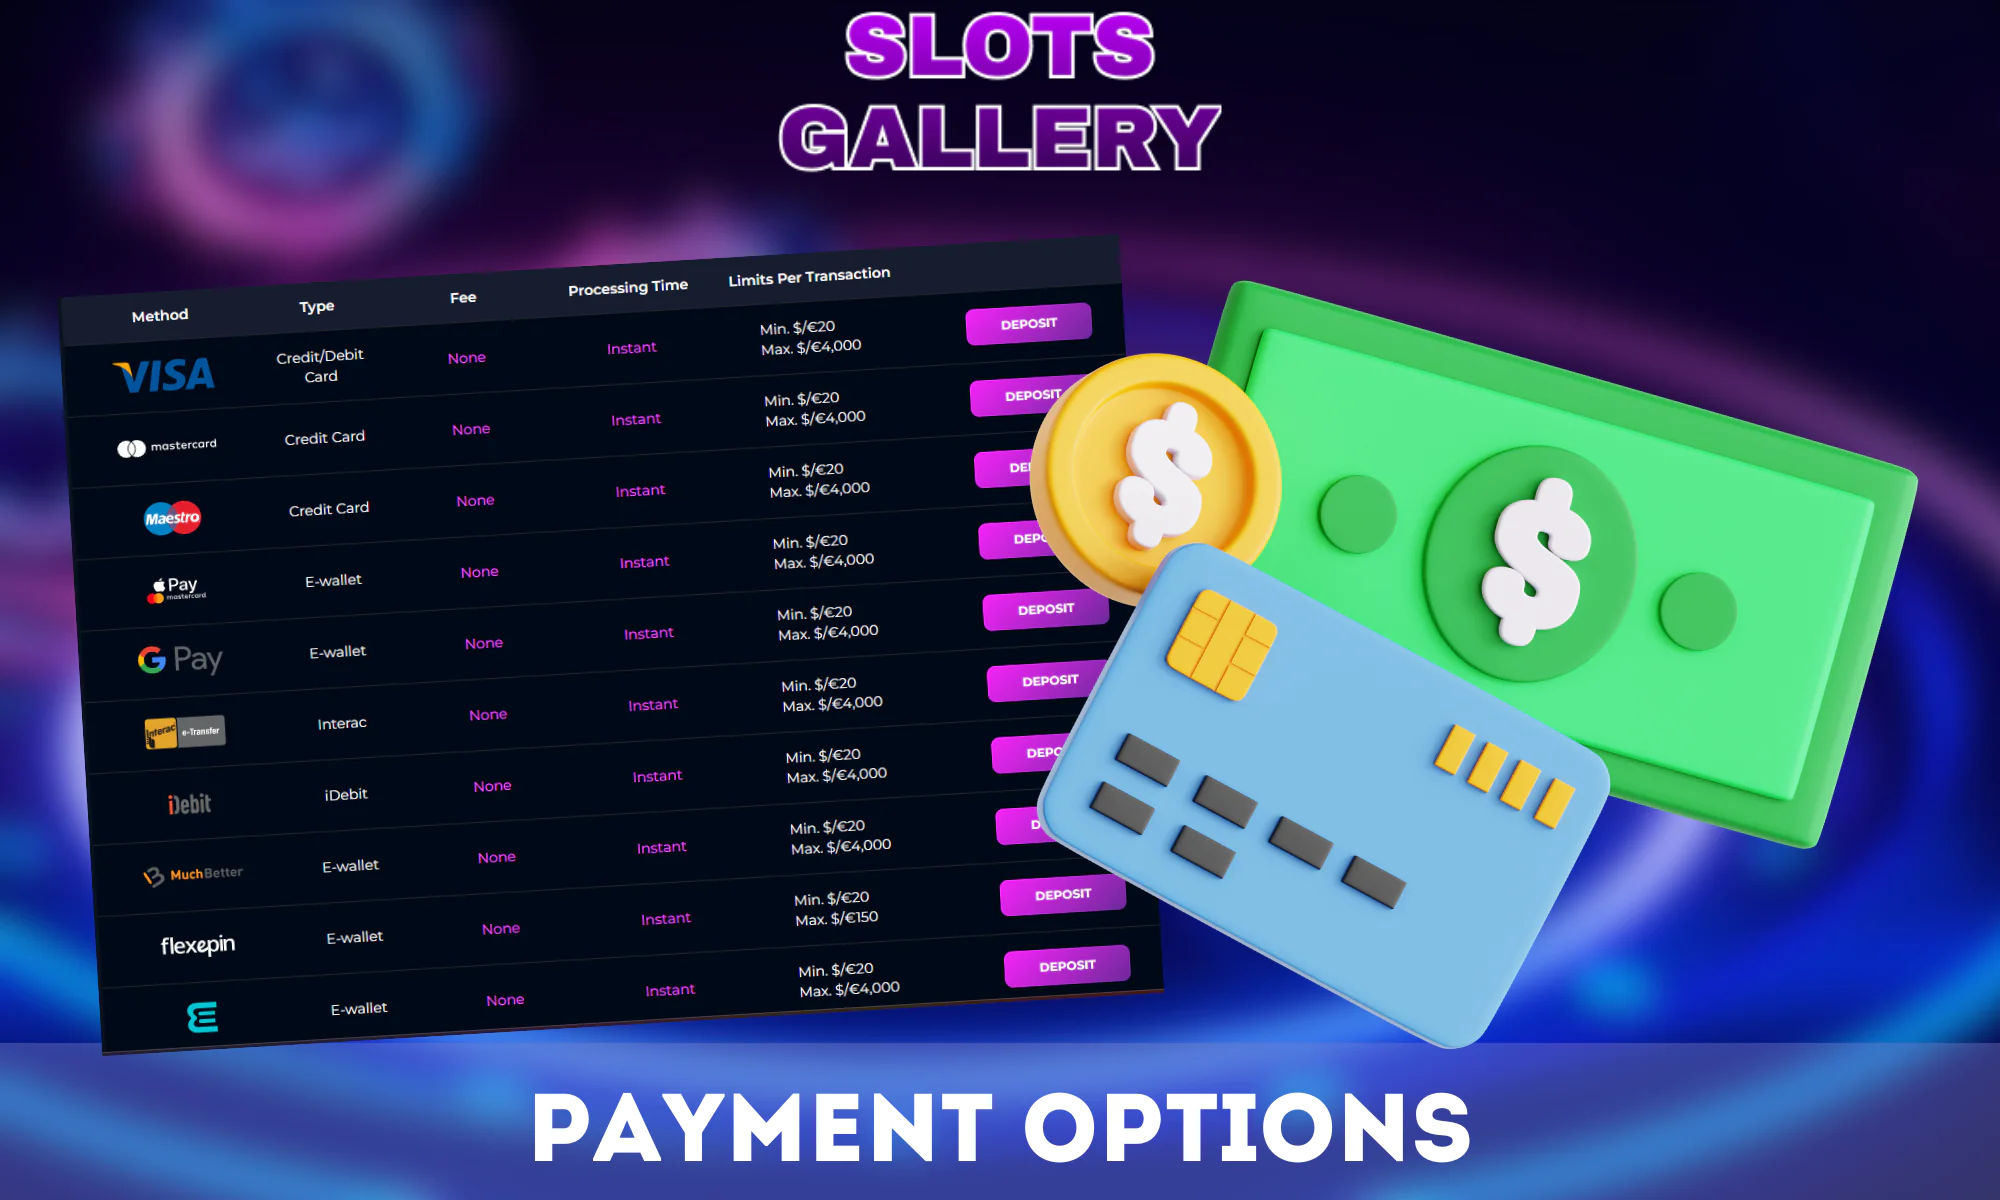 A wide range of methods for both depositing and withdrawing funds is offered by Slots Gallery